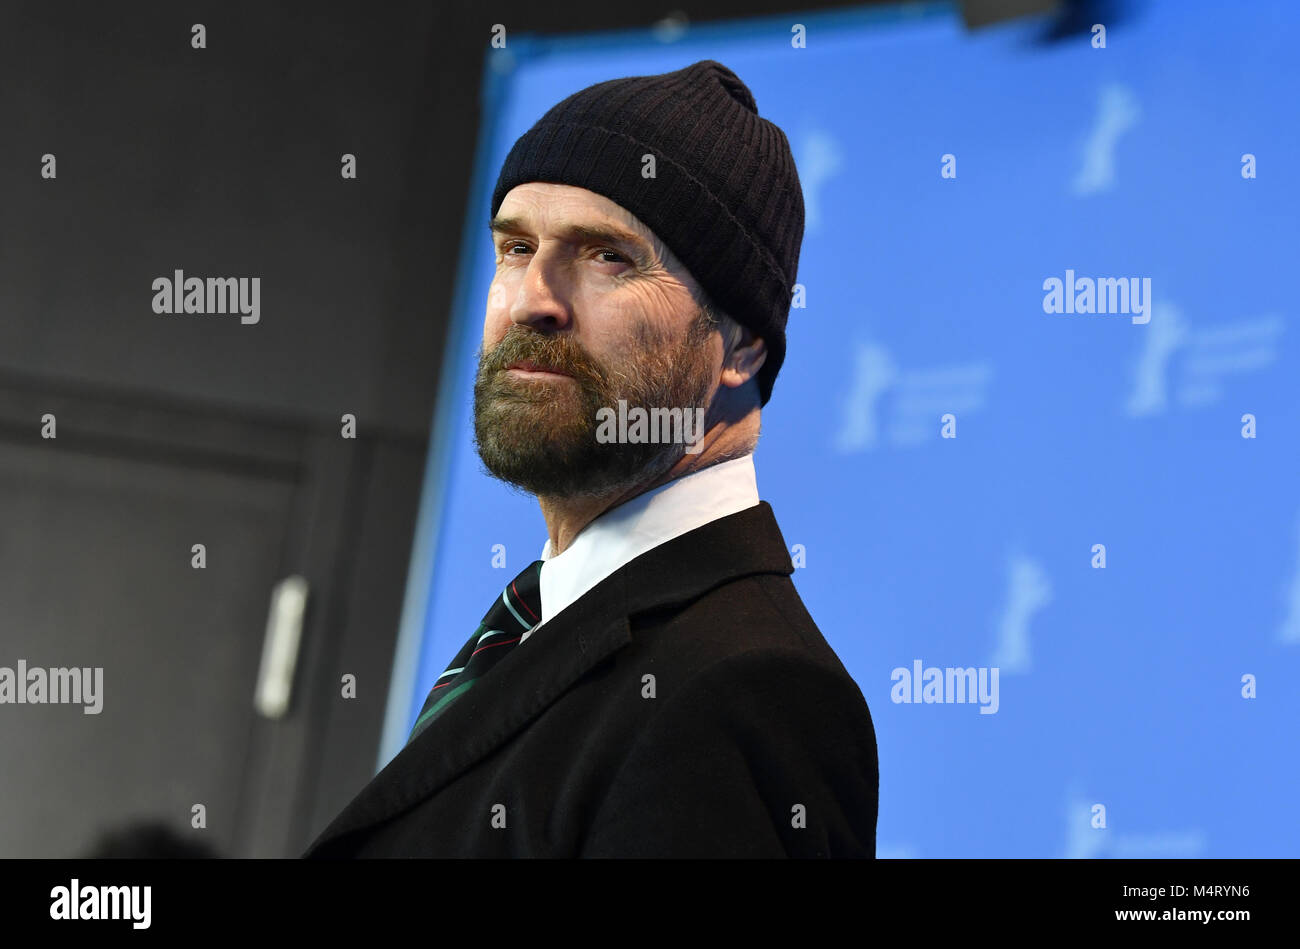 Berlin, Germany. 17th Feb, 2018. Rupert Everett, director, actor, screenwriter, during the photocall of the film 'The Happy Prince' at the Berlinale 2018 Film Festival in Berlin, Germany, 17 February 2018. The film runs in the Berlinale Special Gala section of the 68th International Berlin Film Festival. Credit: Jens Kalaene/dpa/Alamy Live News Stock Photo